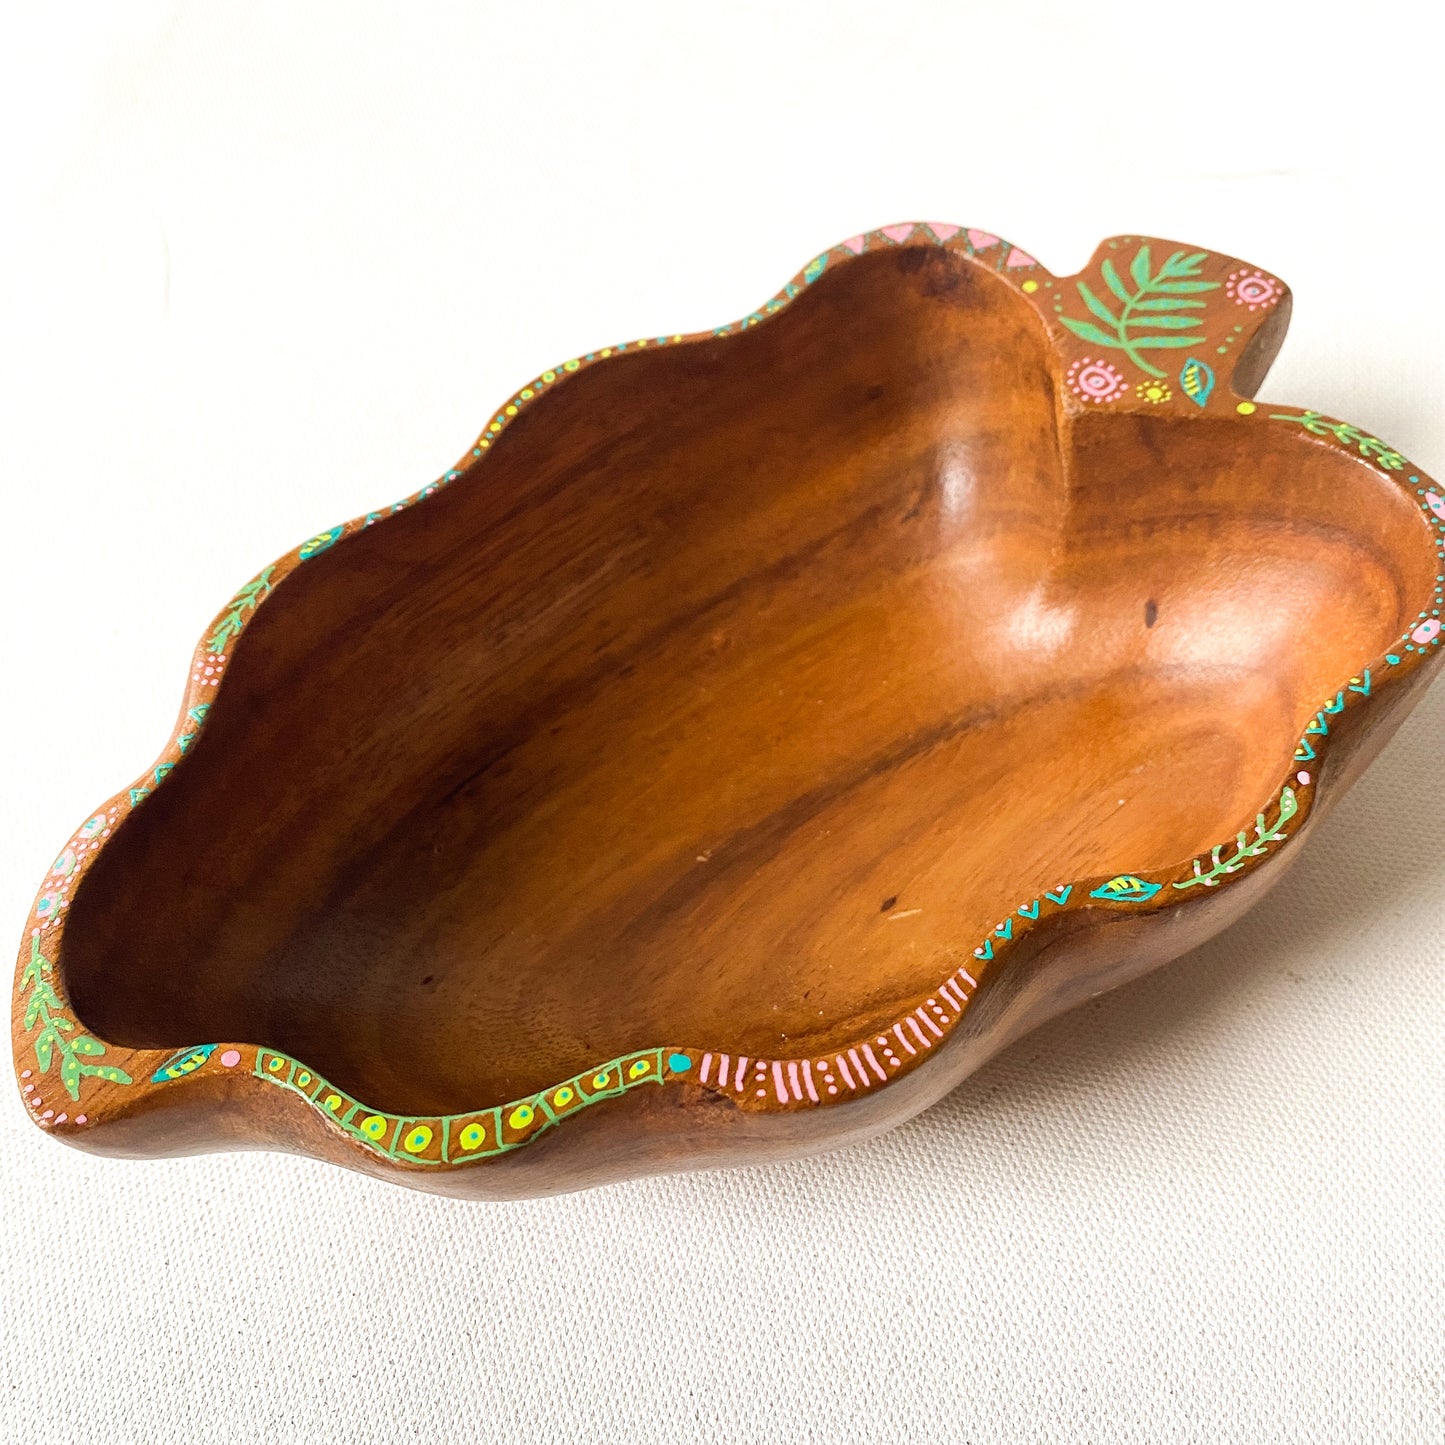 Tropical Hand Painted, Reclaimed Monkeypod Wood Bowl